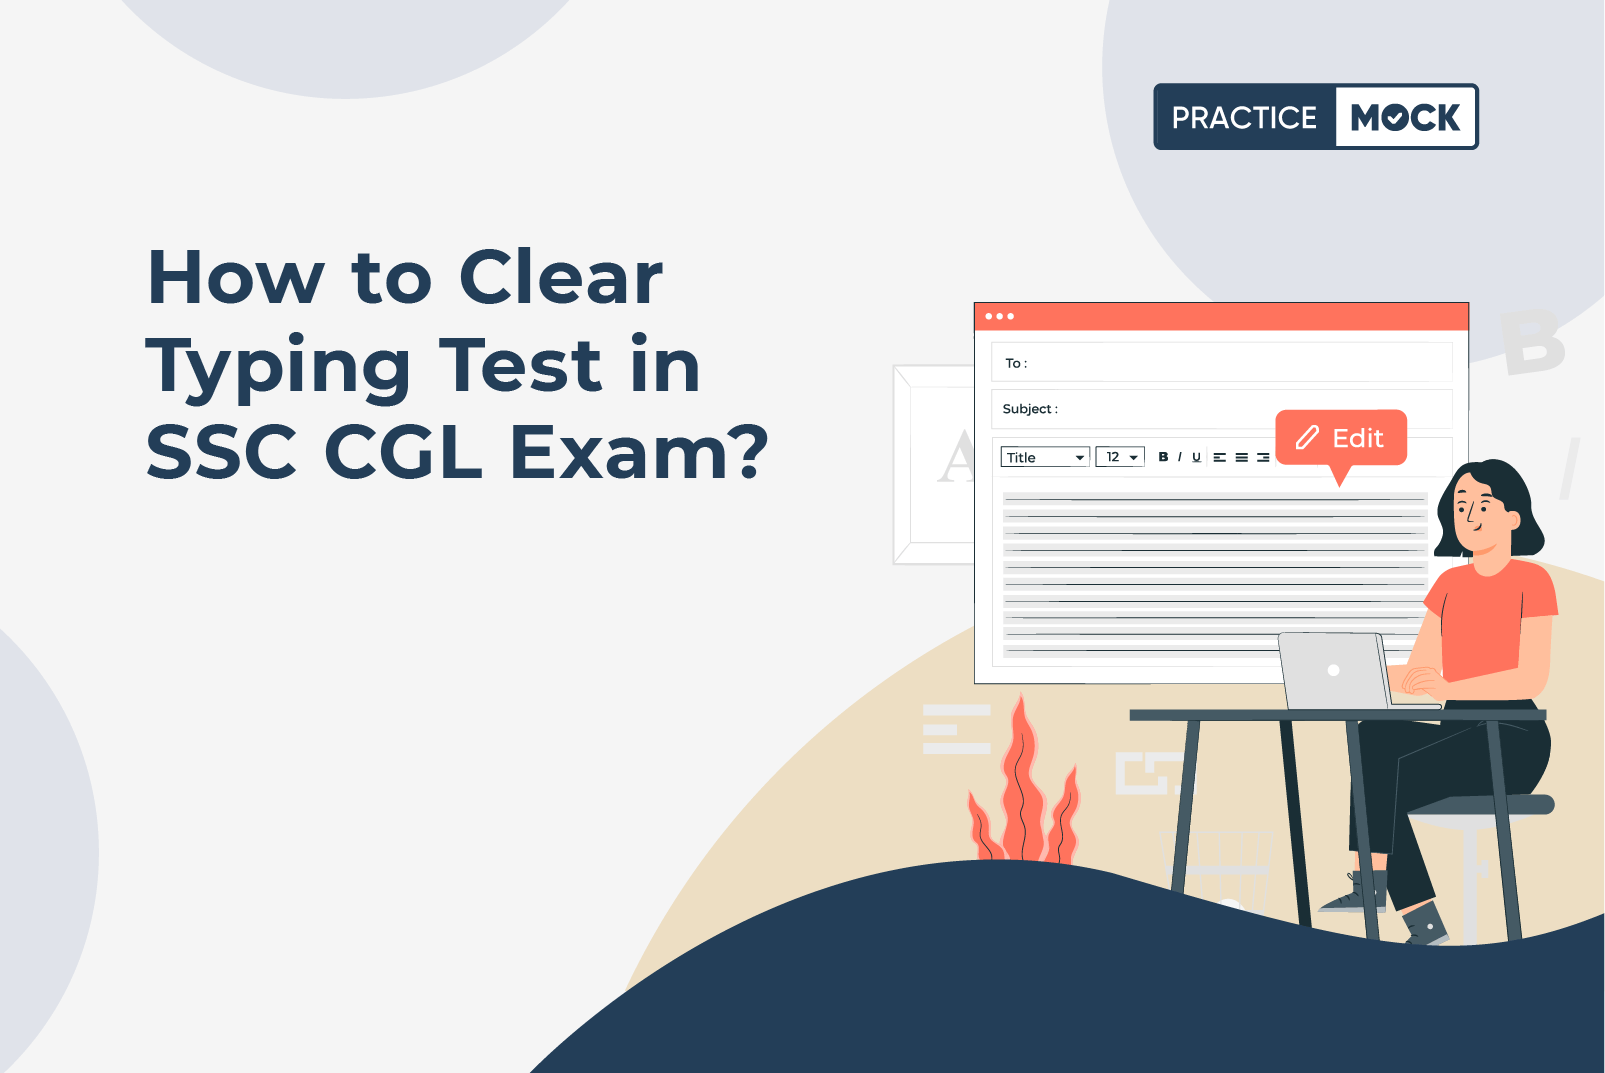 How to Clear Typing Test in SSC CGL Exam